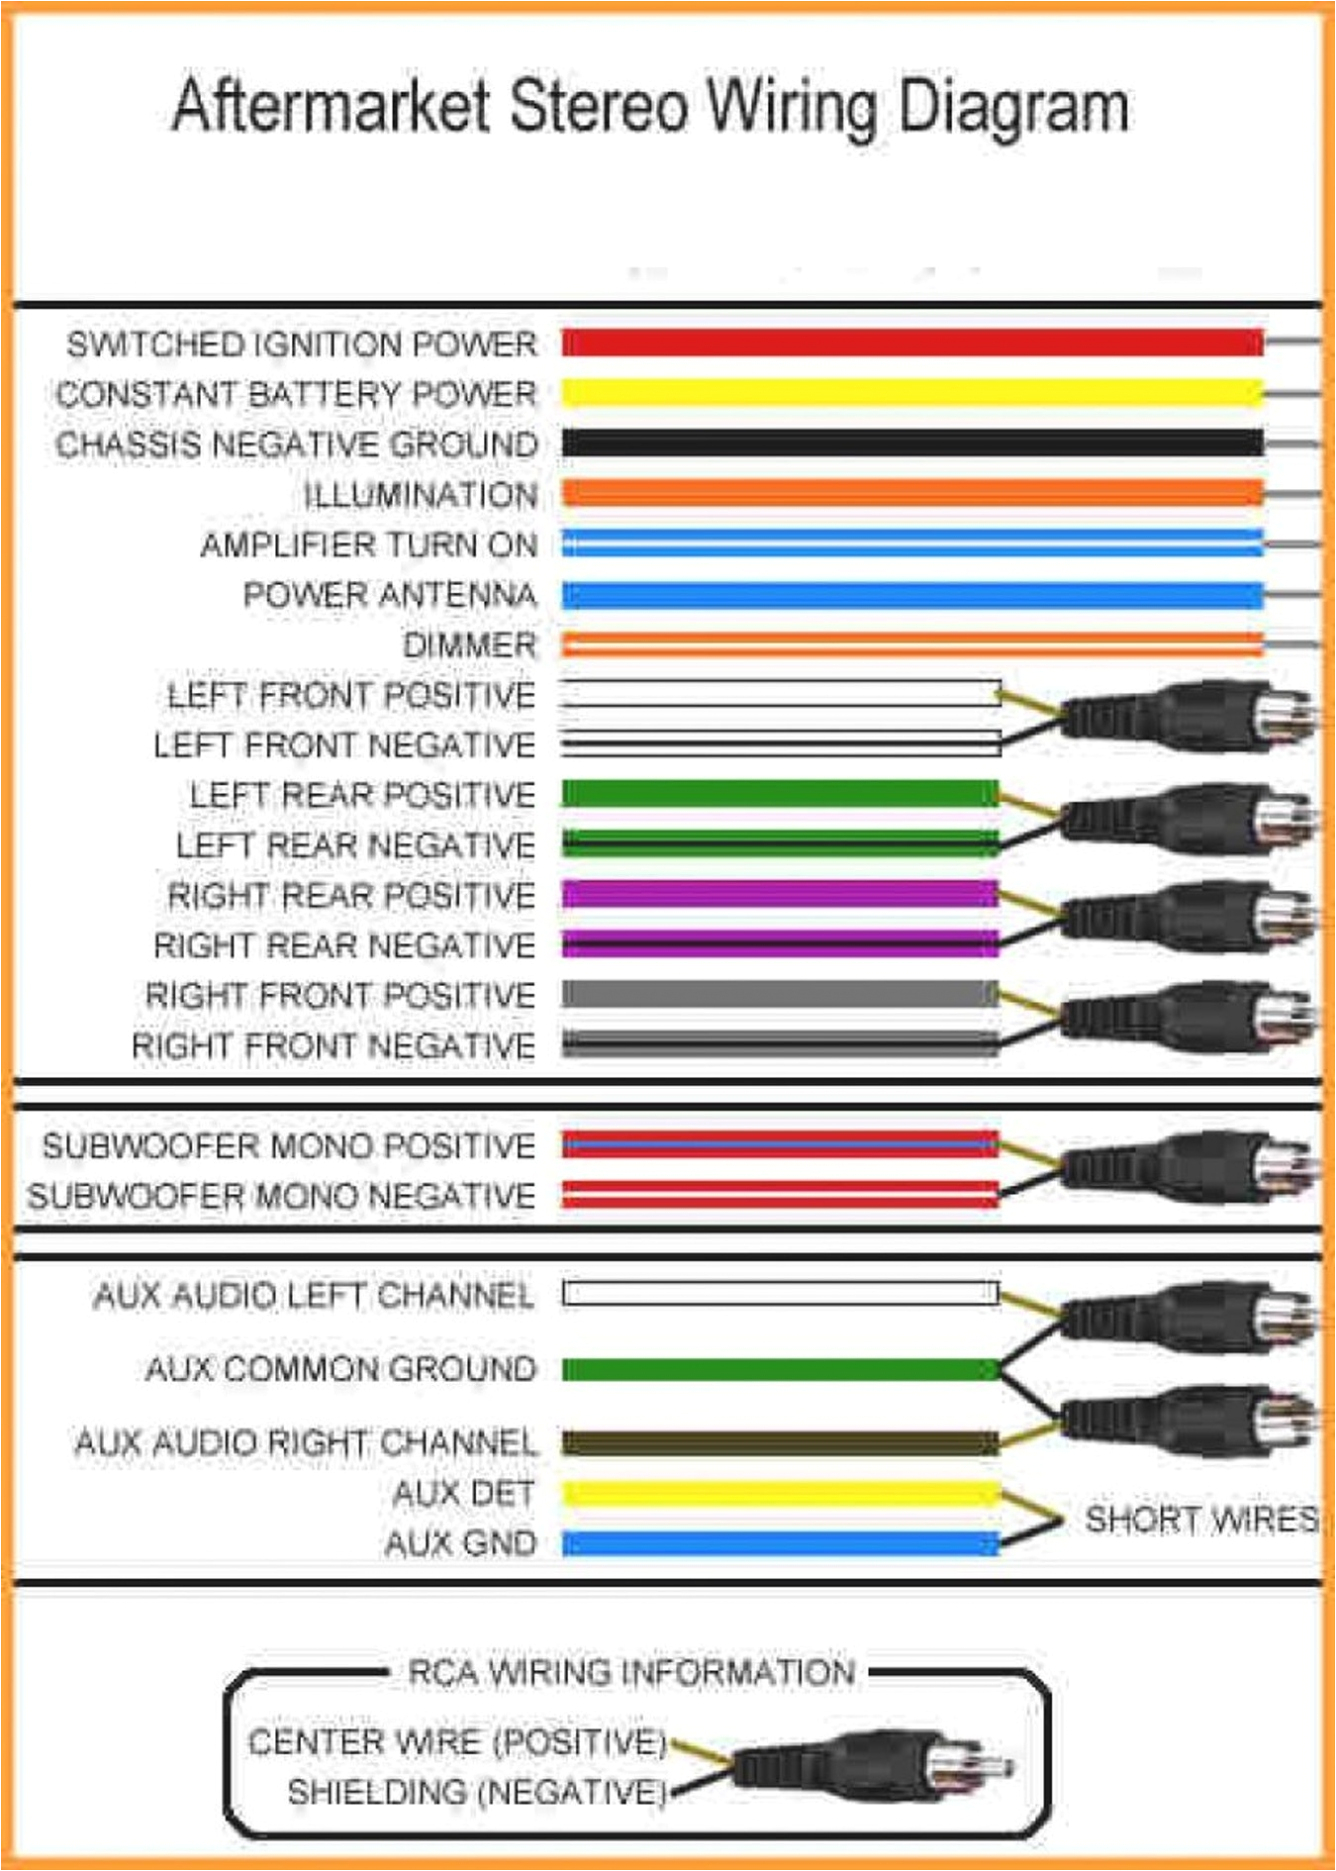 wiring harness colors don t match wiring diagram schematic sony car stereo wiring harness color code car wiring harness color code